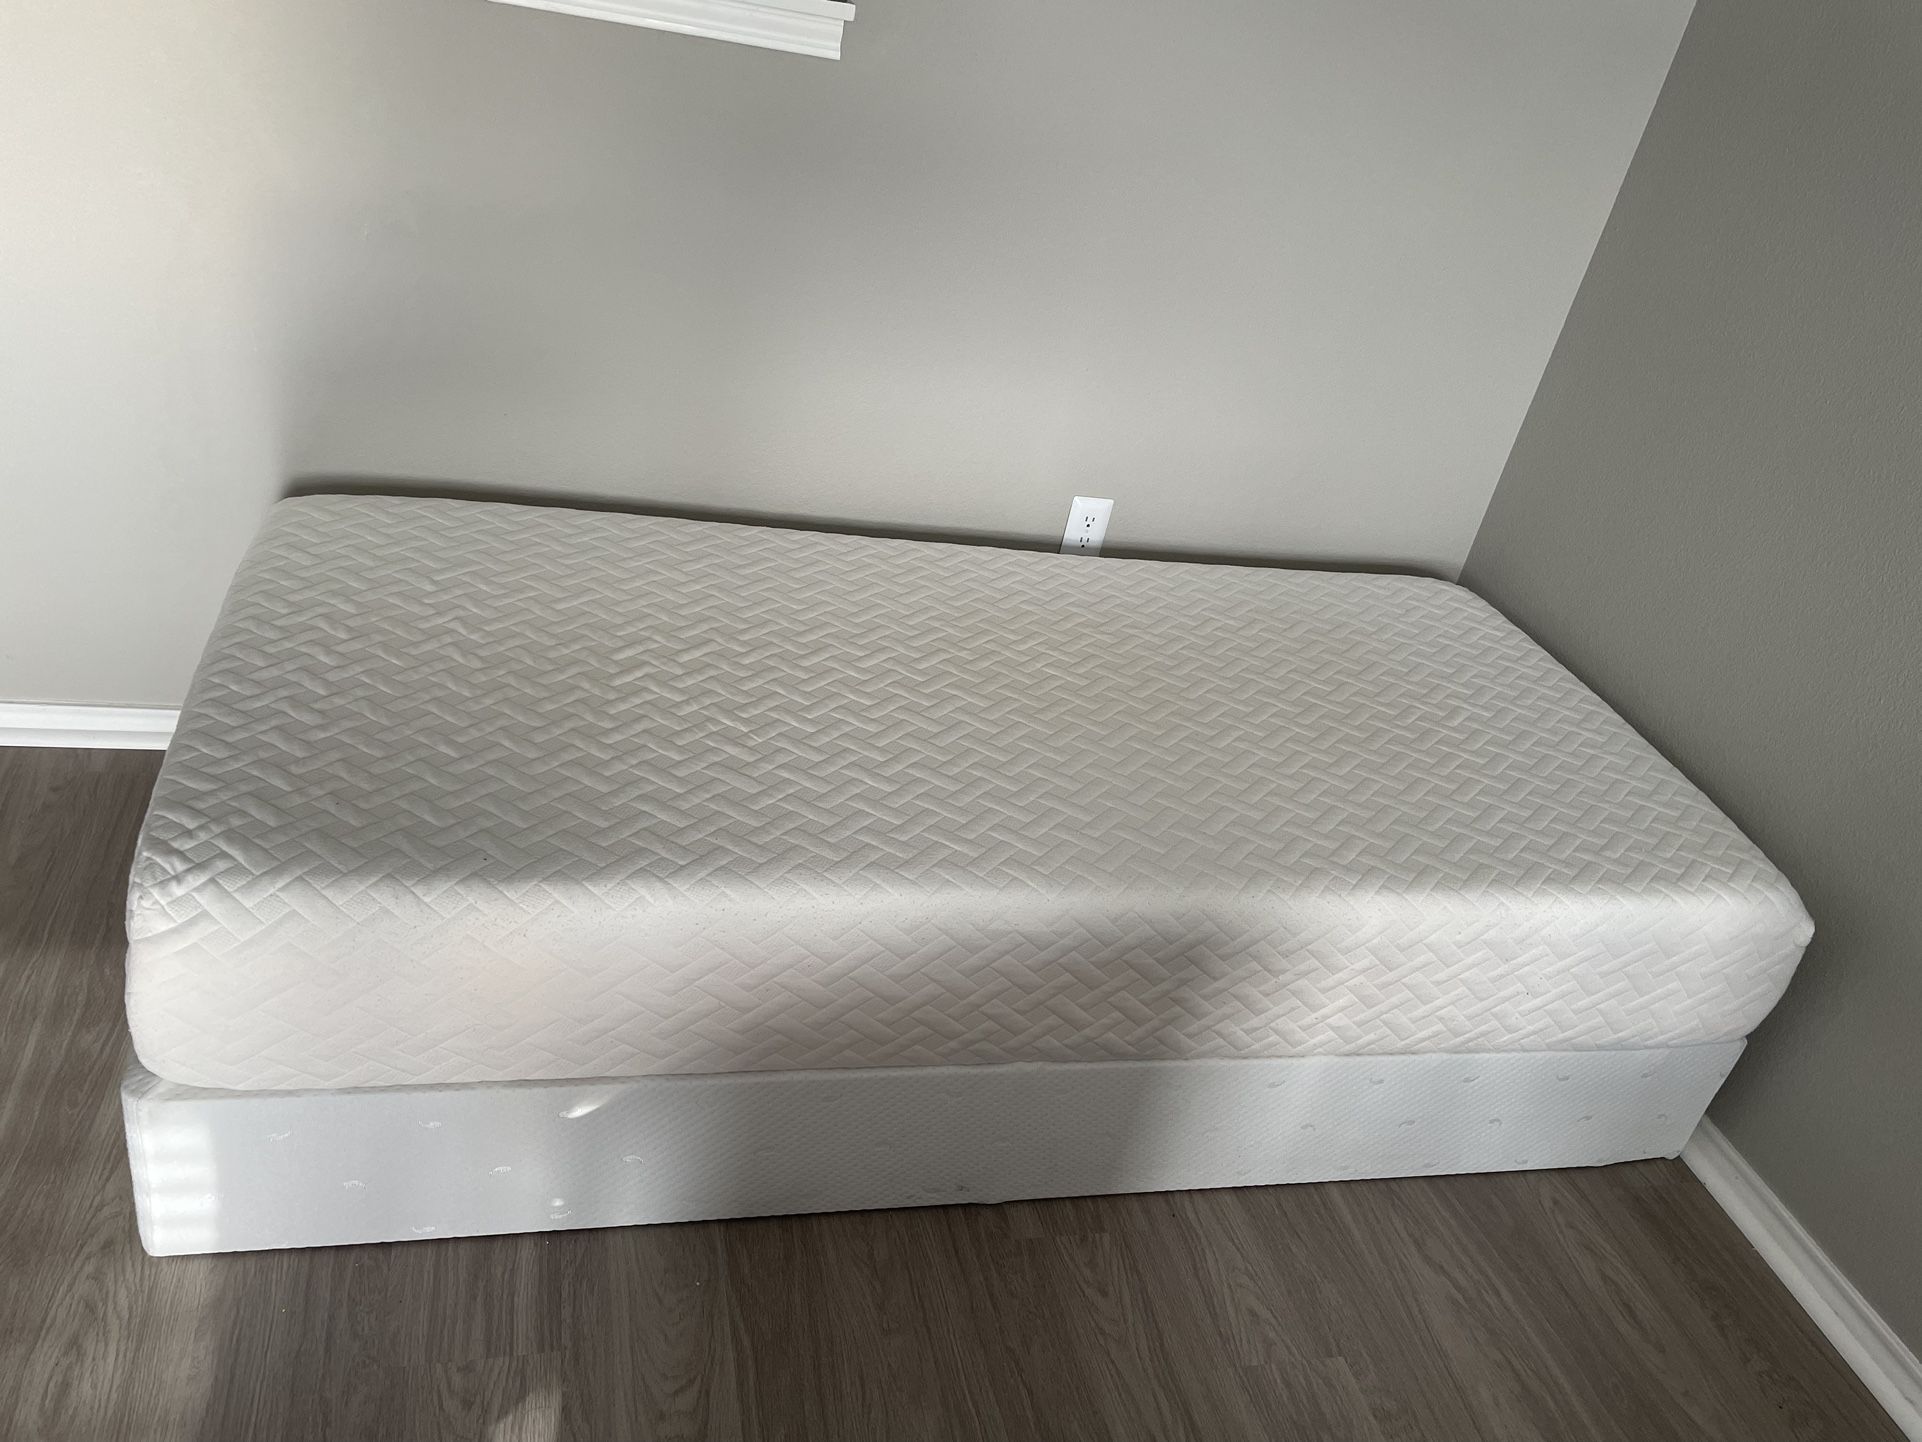 Mattress (Lucid), Bed Frame, Camping Chairs Sale